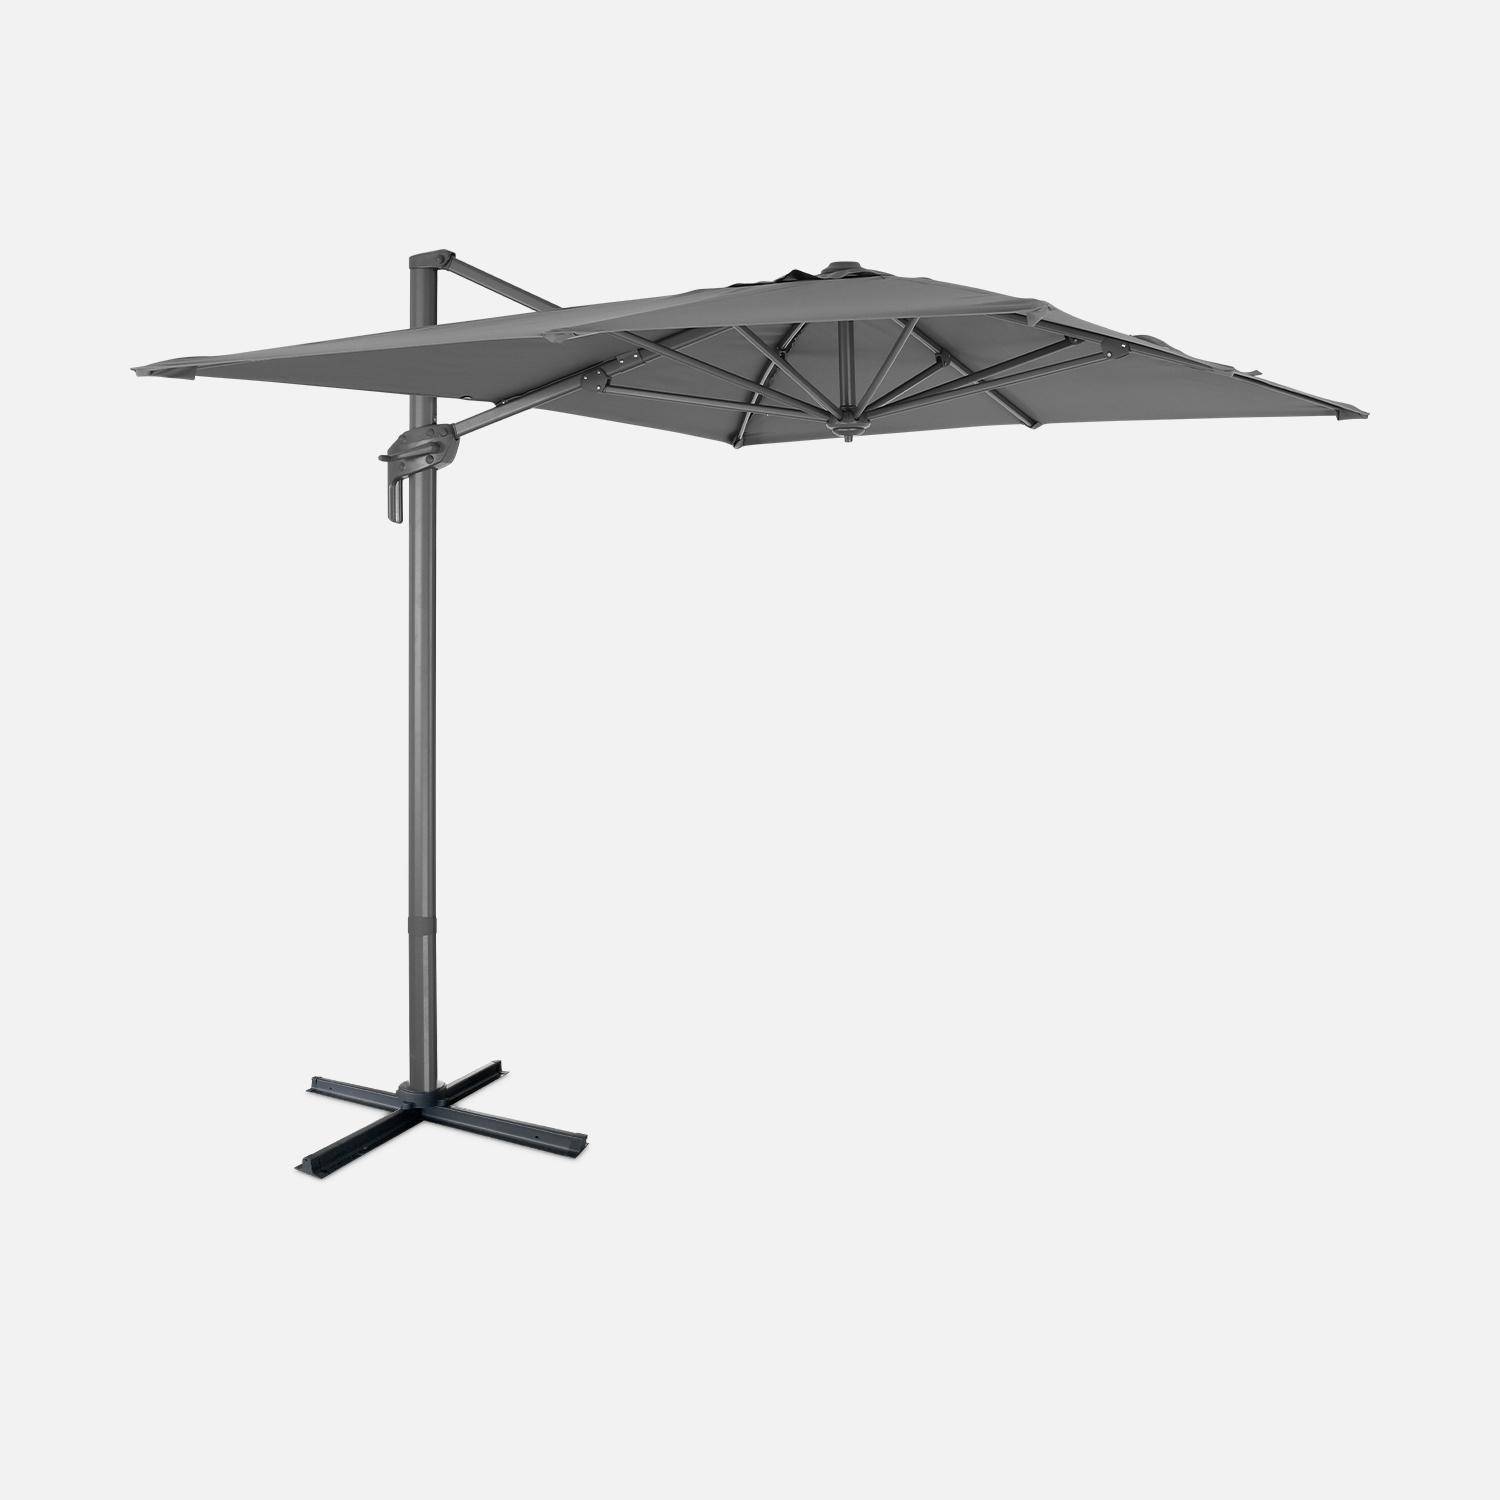 2x3m rectangular cantilever paraso - parasol can be tilted, folded and rotated 360 degreesl - Antibes - Grey,sweeek,Photo3